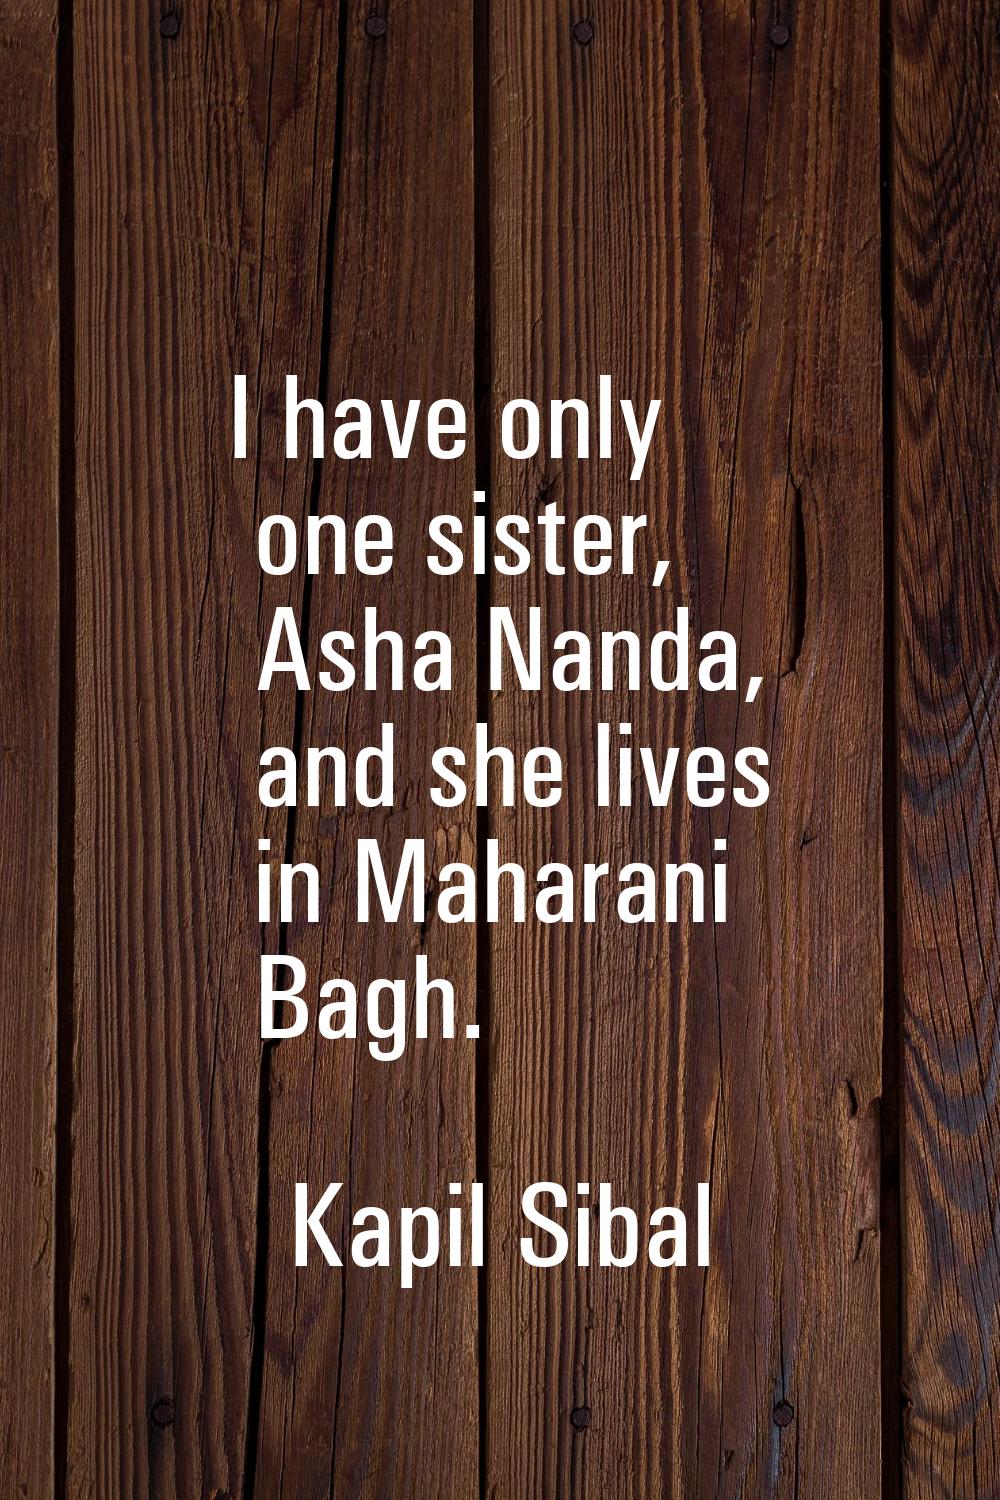 I have only one sister, Asha Nanda, and she lives in Maharani Bagh.